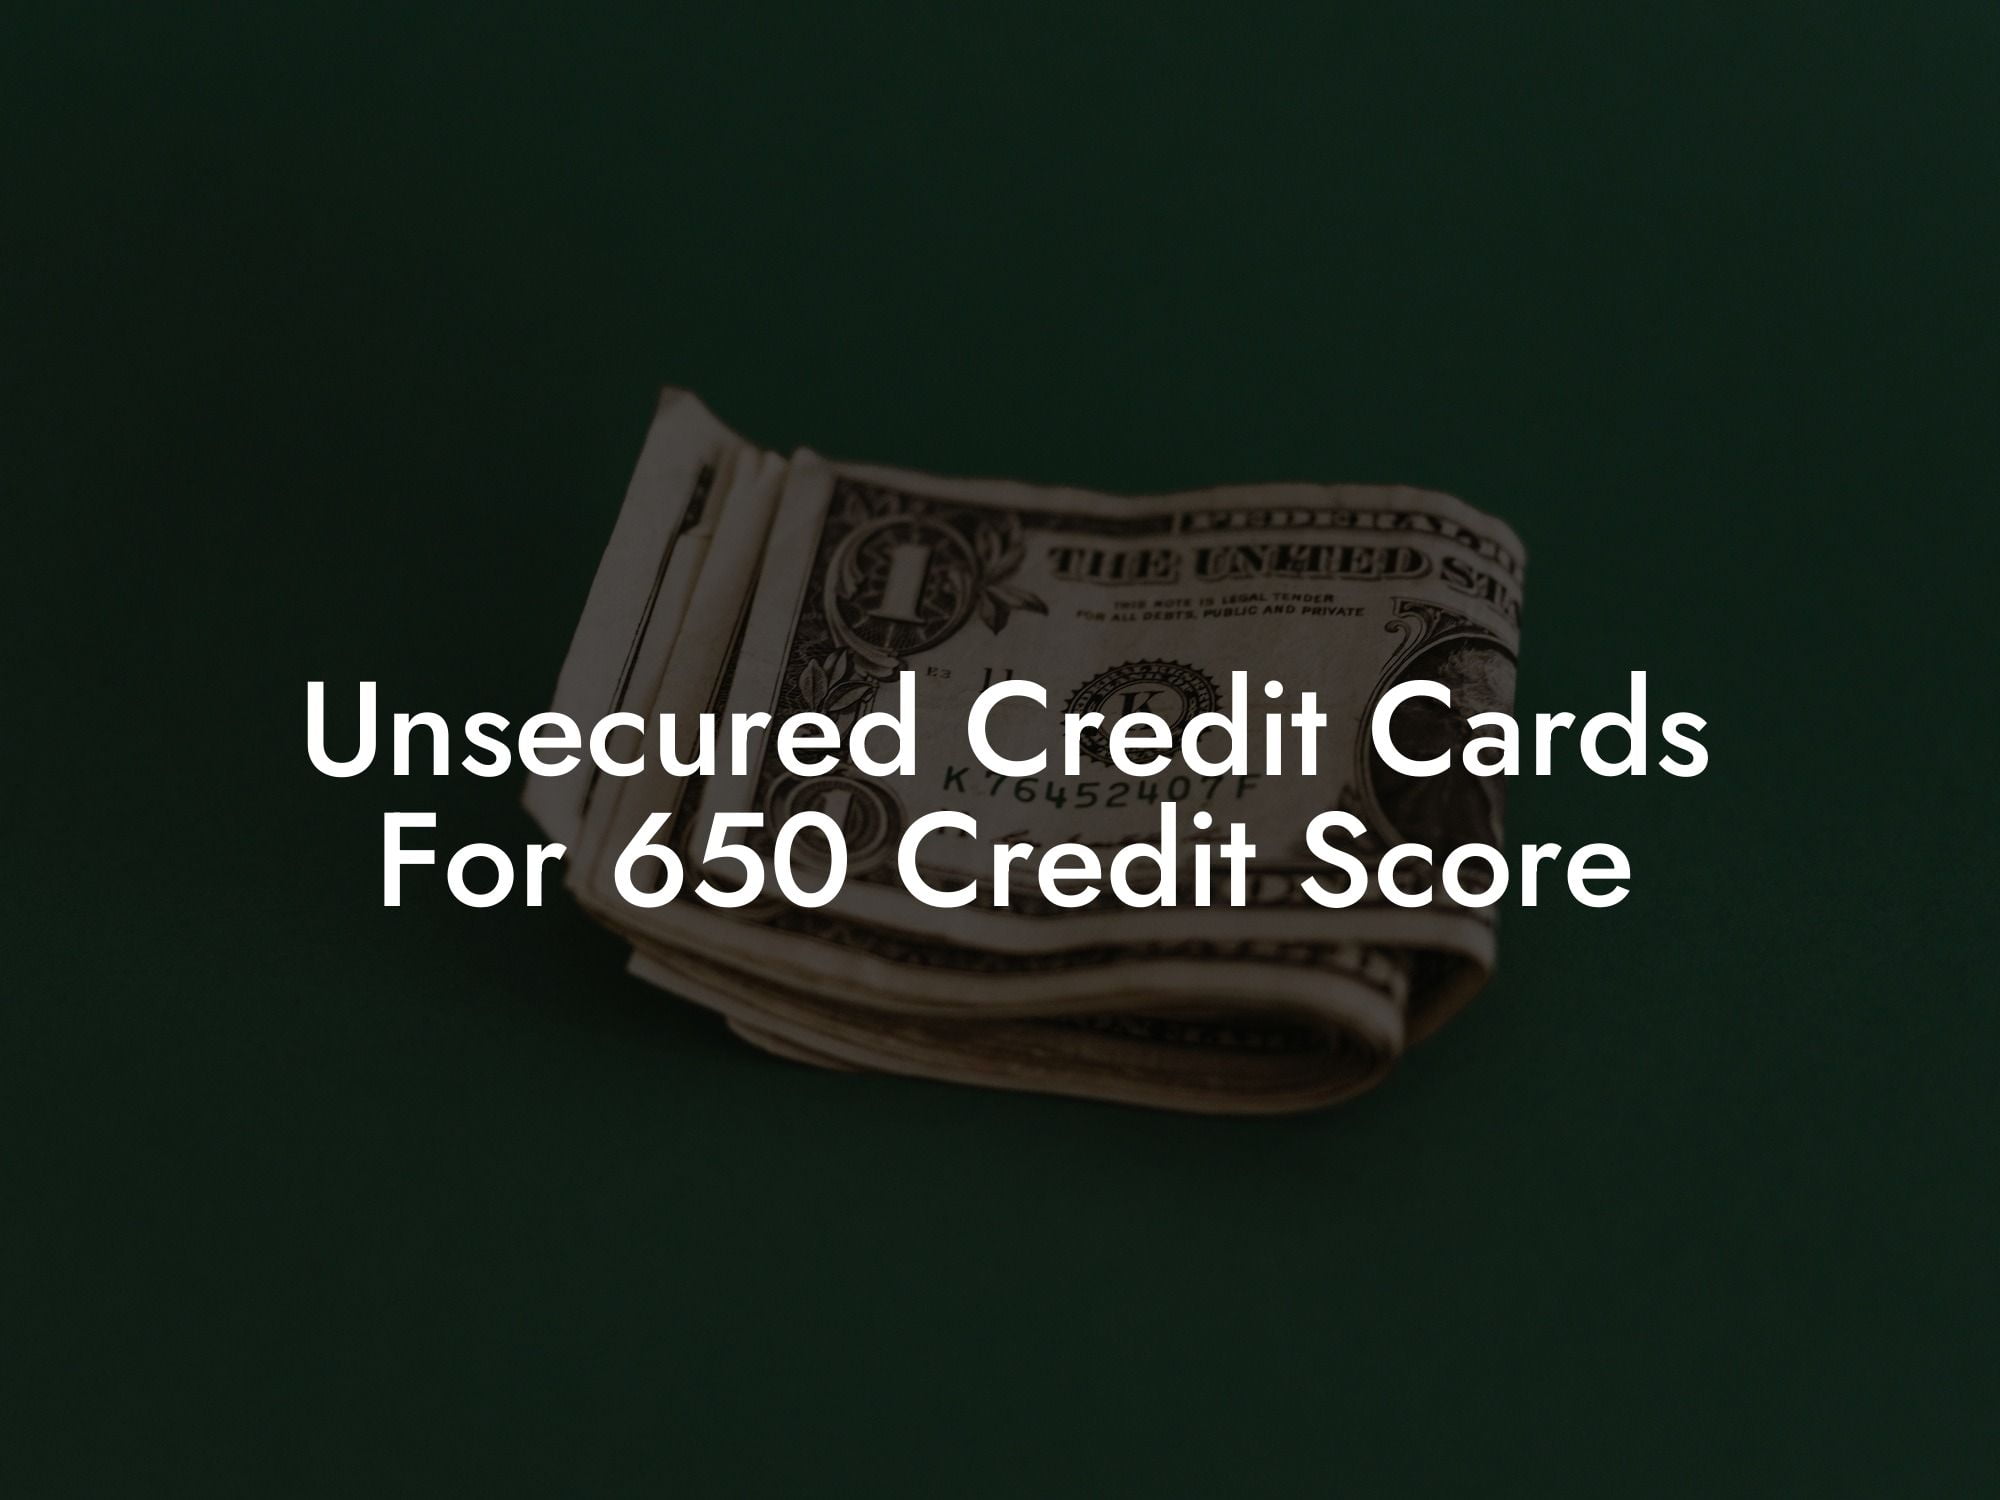 Unsecured Credit Cards For 650 Credit Score